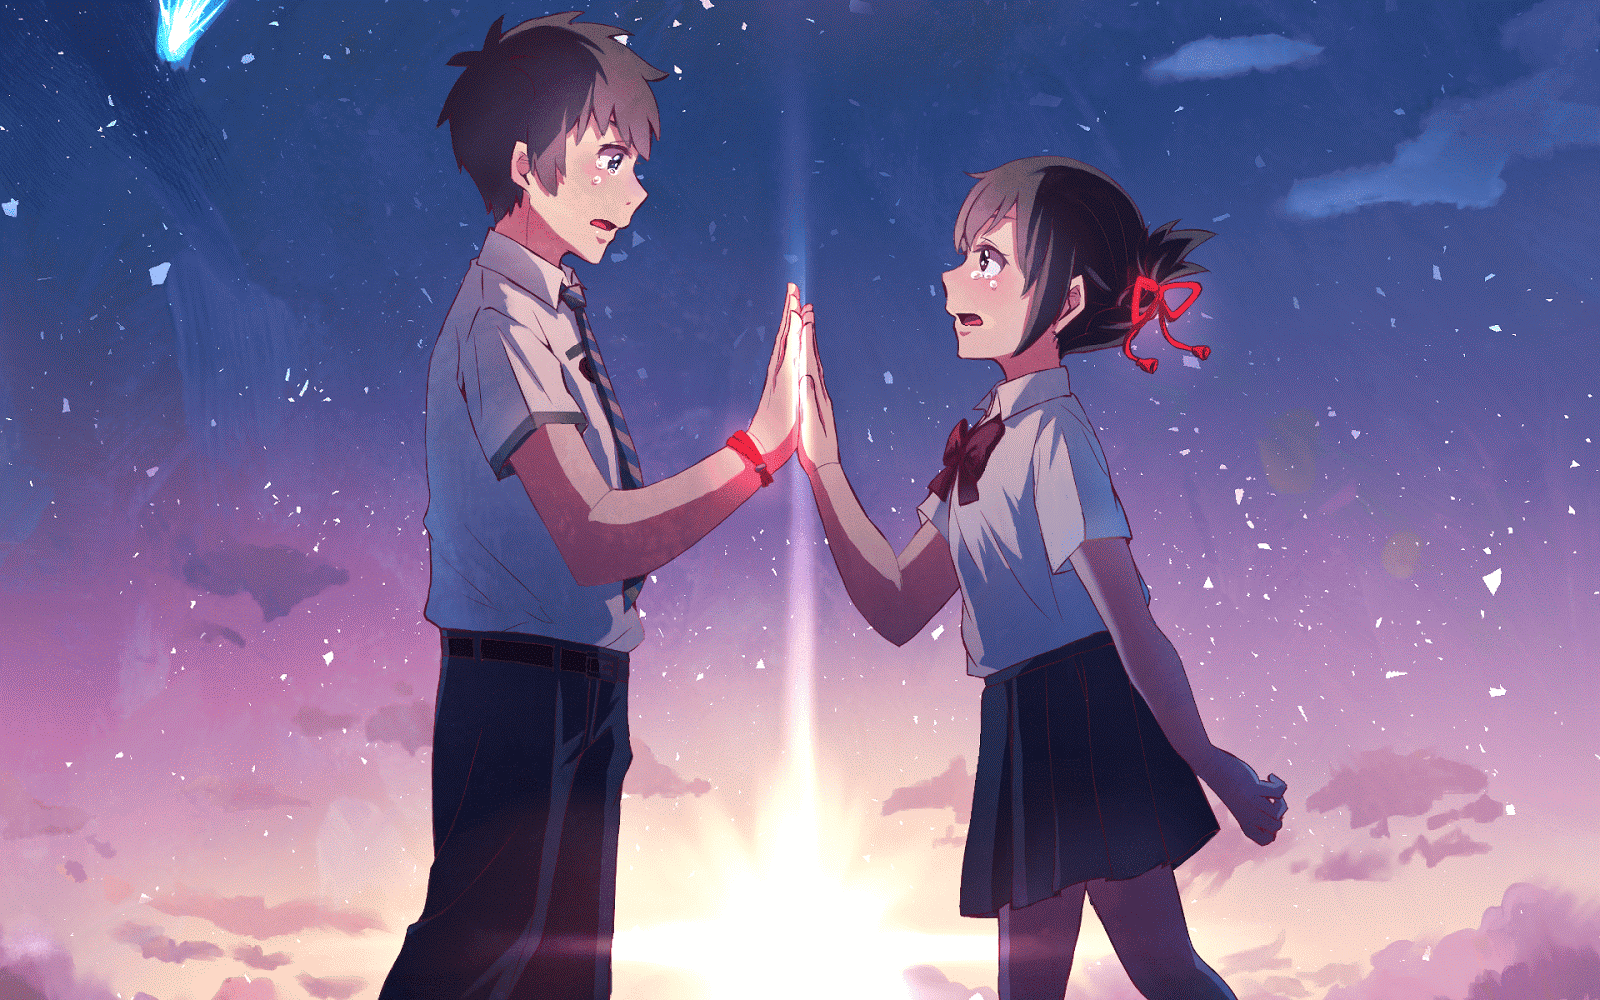 Two contrasting yet connected characters in Kimi No Na Wa